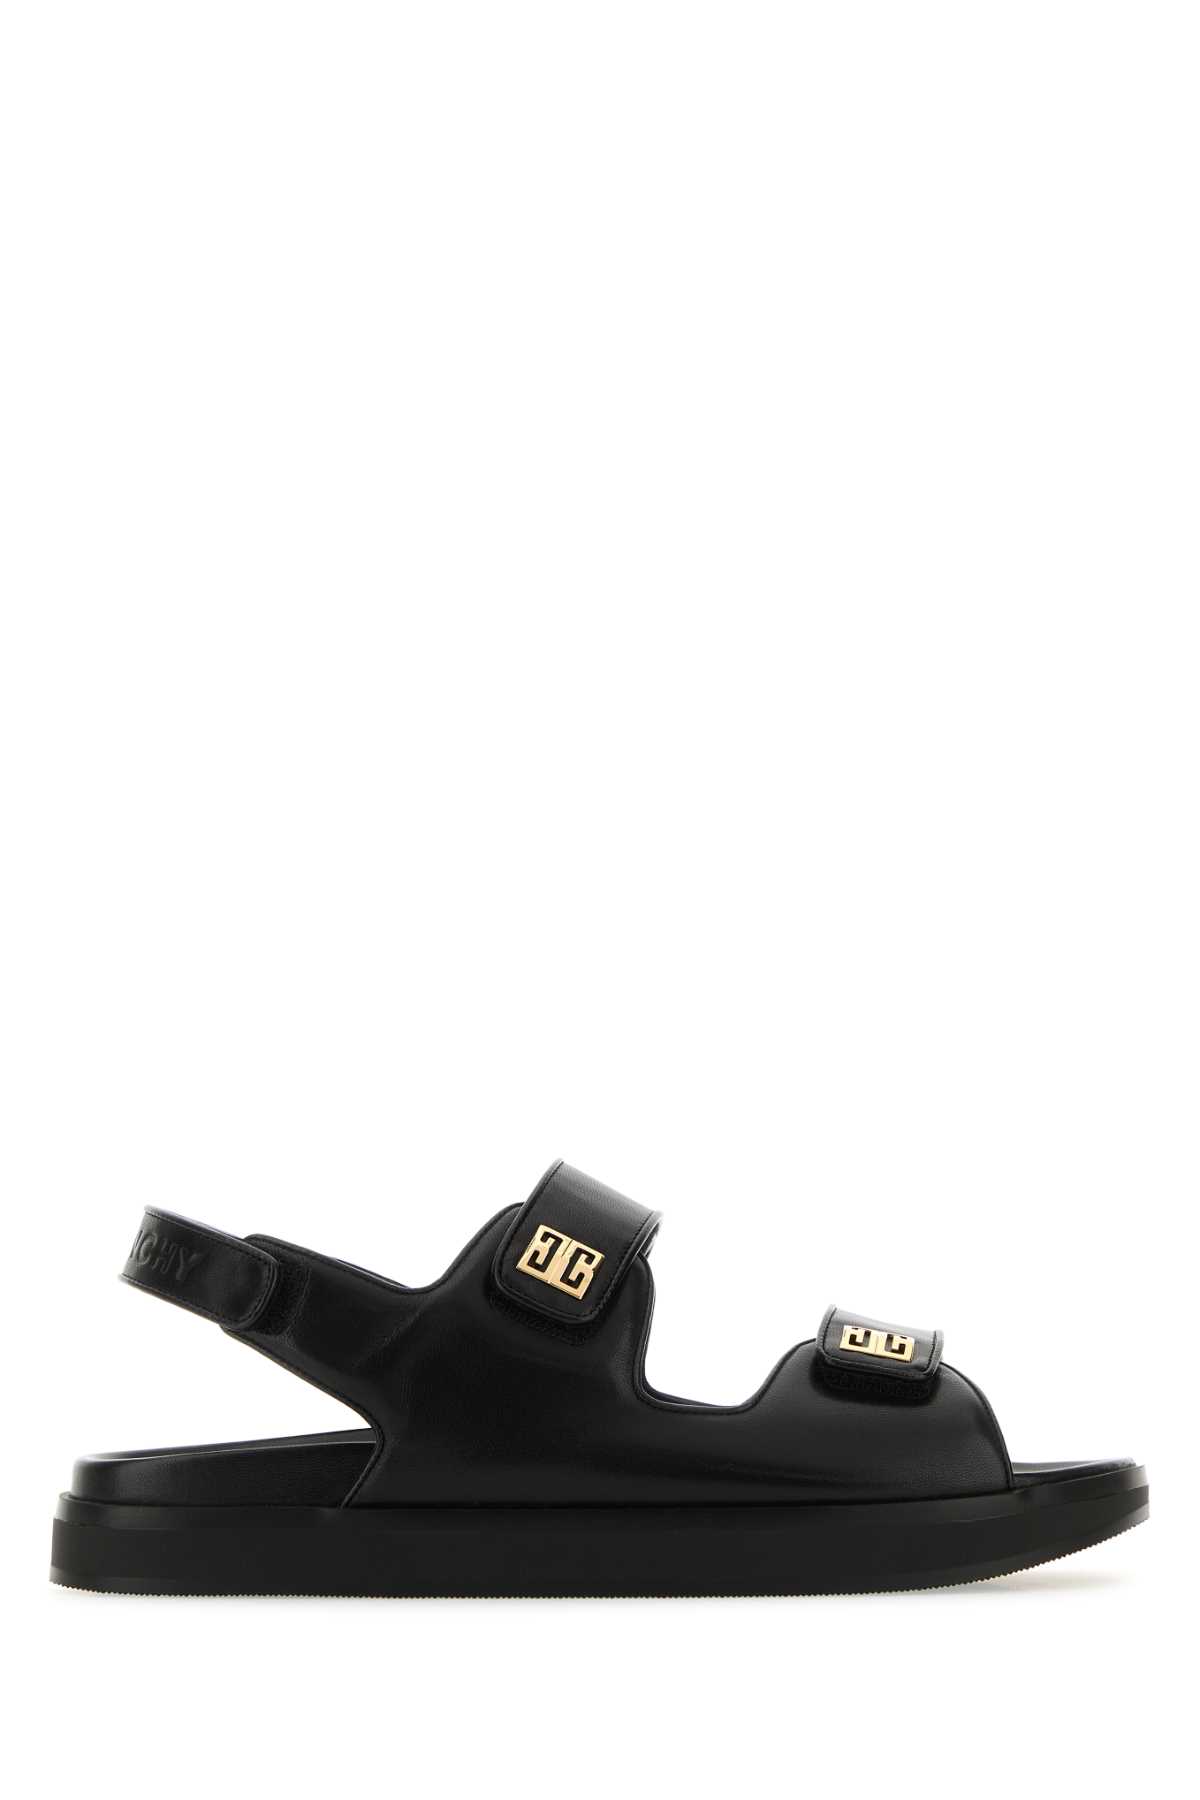 Givenchy Black Leather 4g Sandals